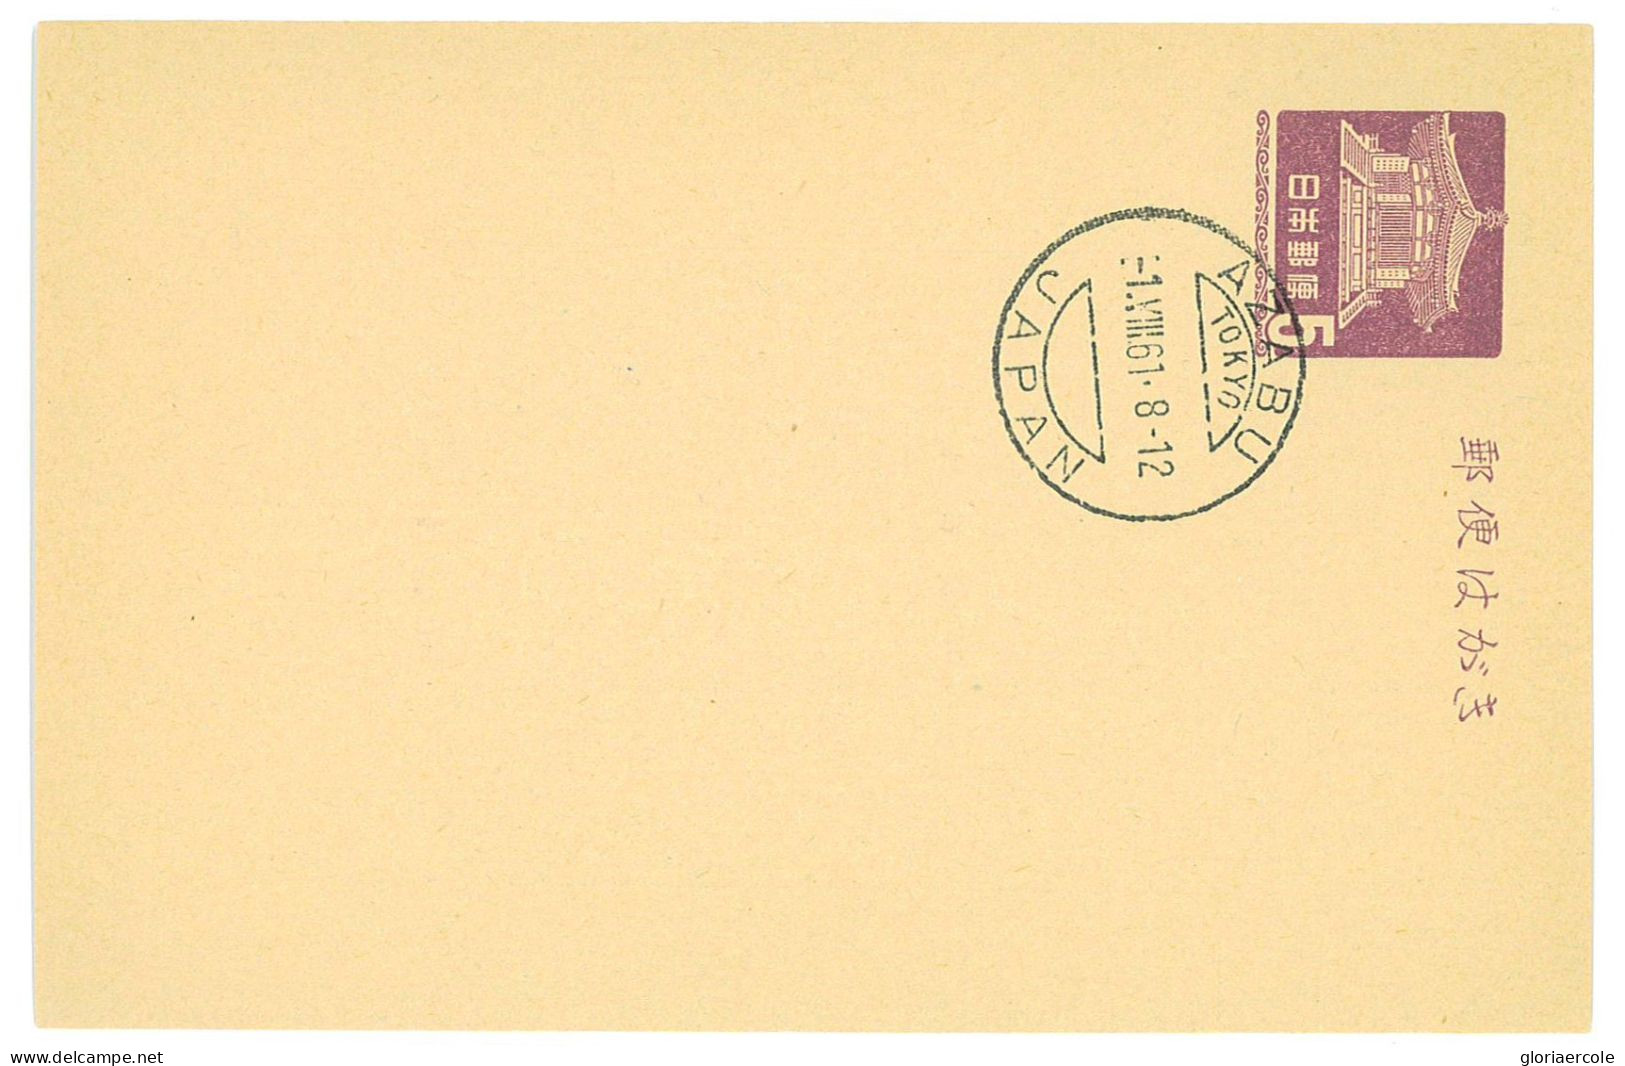 P2806 - JAPAN, SMALL LOT OF POSTAL STATIONARY USED WITH FAVOR CANCELLATIONS 10 DIFFERENT PIECES 1950/60